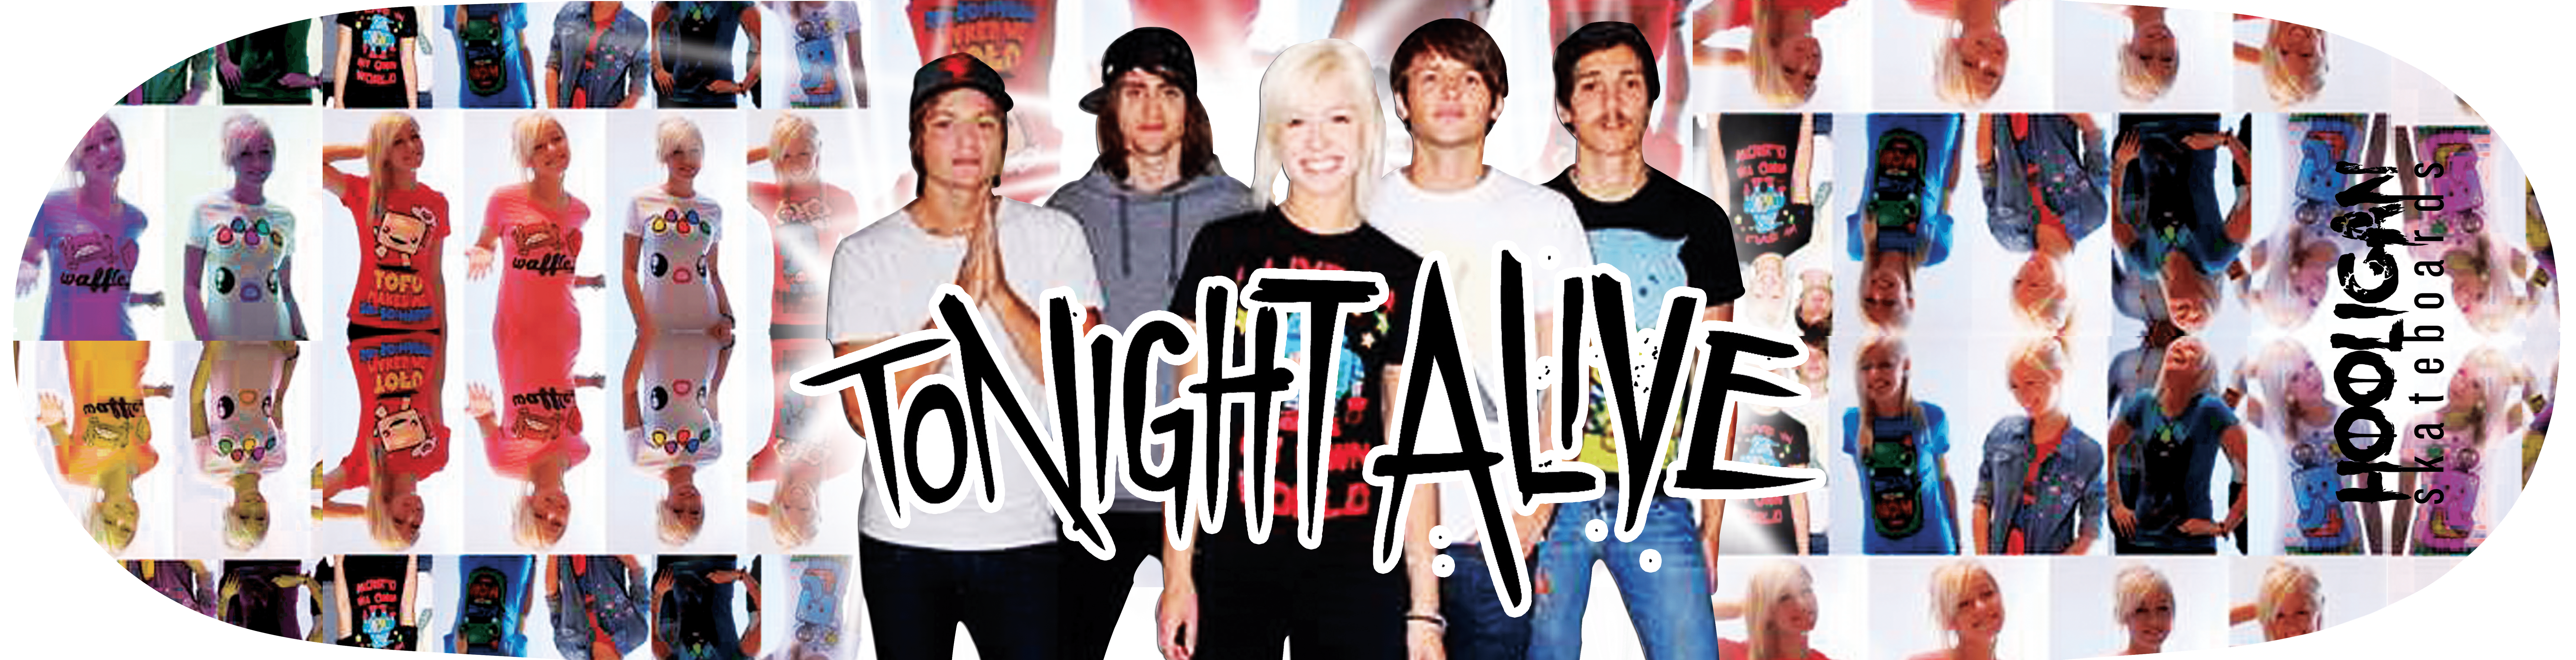 Tonight Alive Kick Flip for the cause